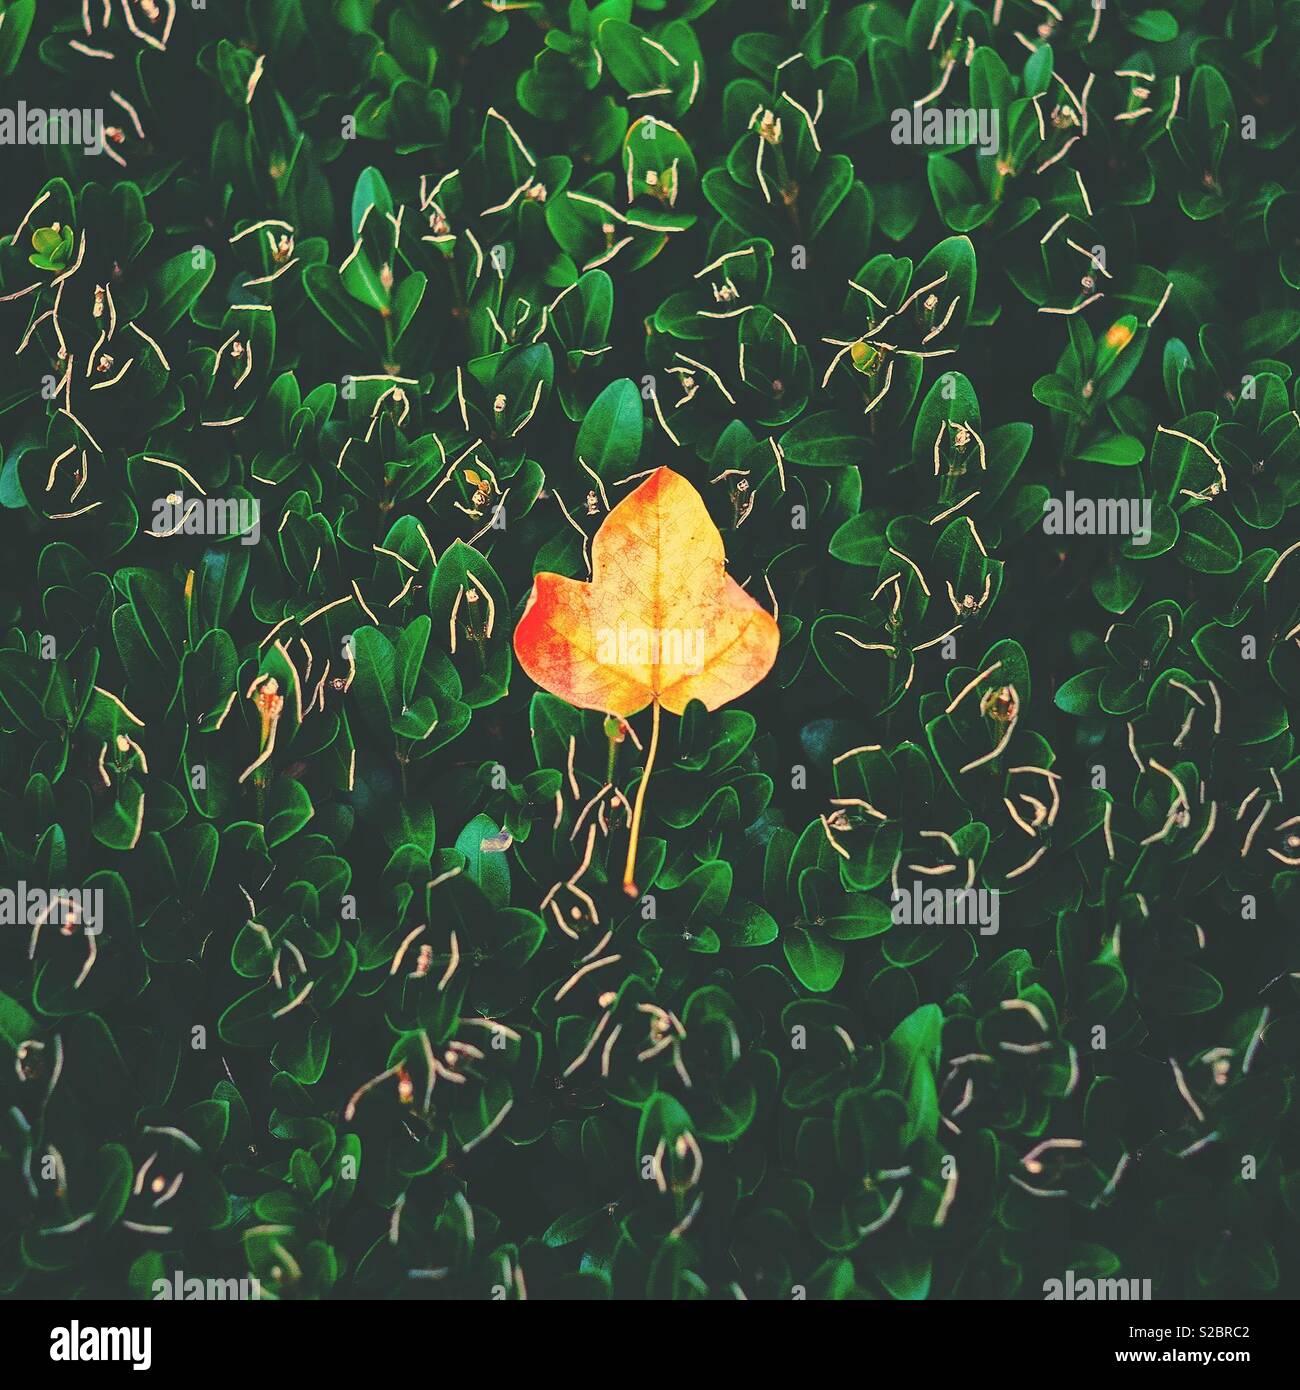 The first fallen leaf of Autumn / Fall - single golden leaf garden nature background Stock Photo